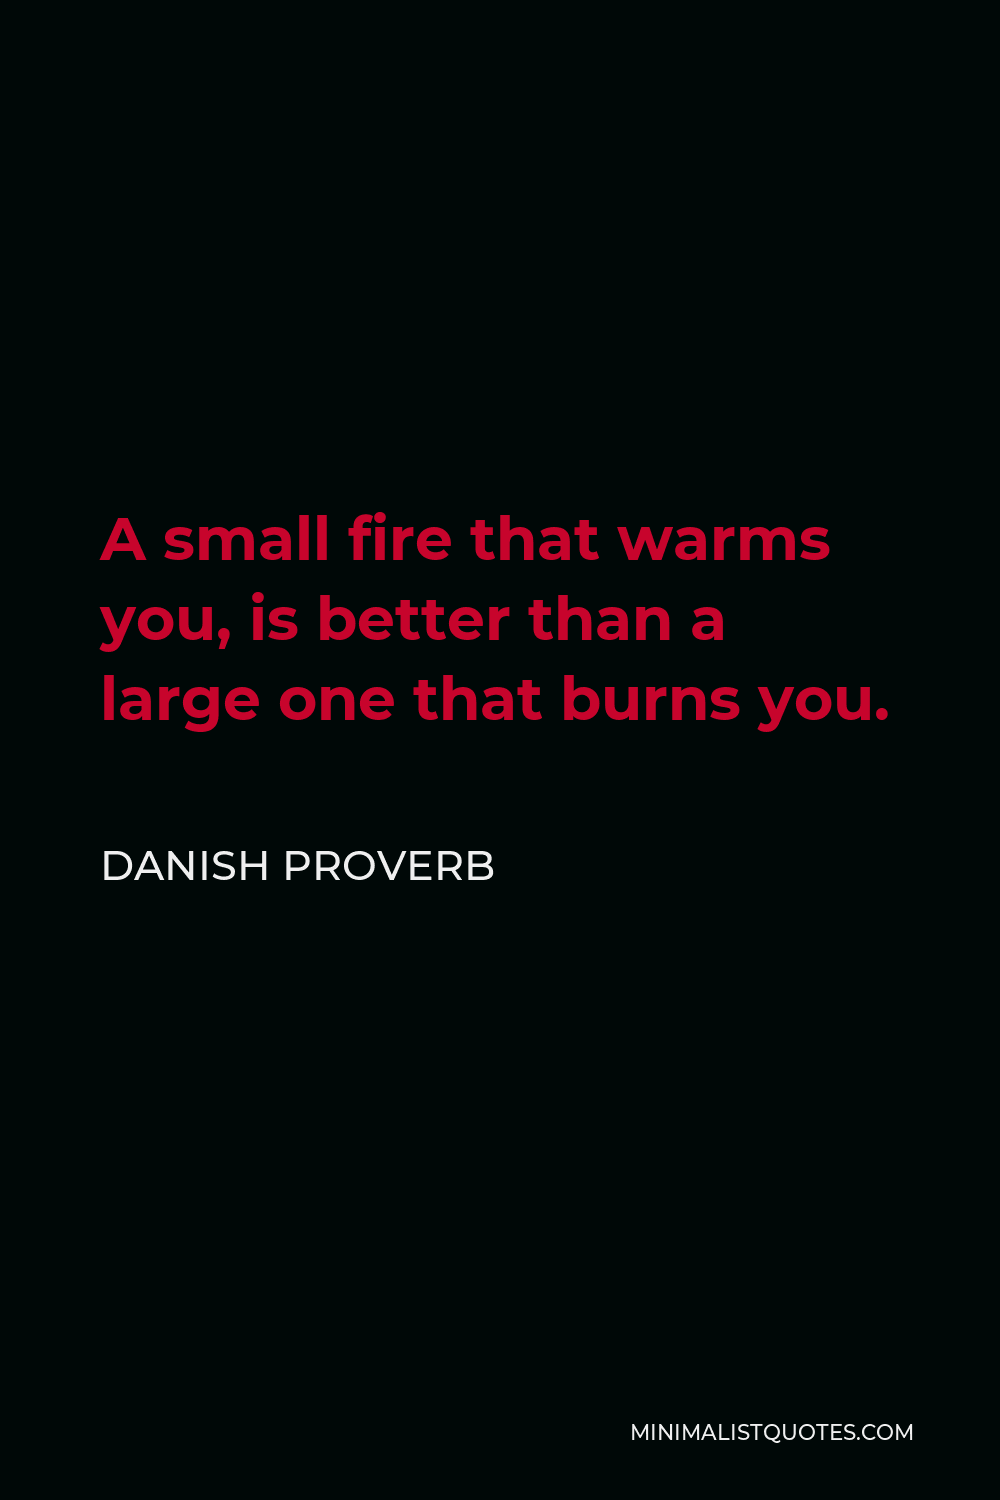 Danish Proverb Quote - A small fire that warms you, is better than a large one that burns you.